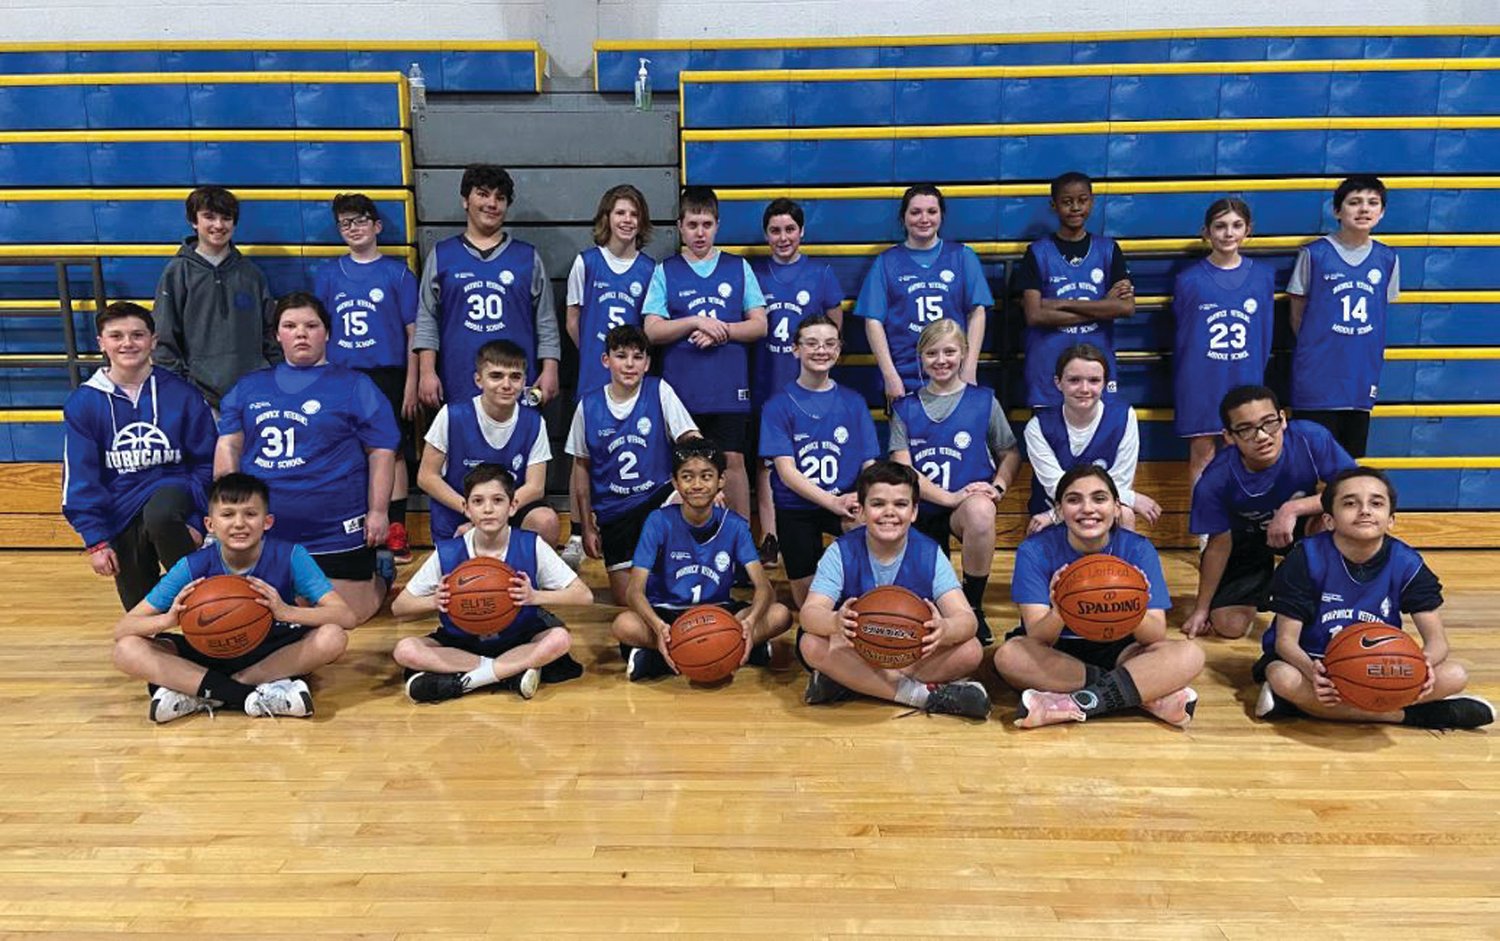 A SENSE OF UNITY: The Vets unified basketball team. (Submitted photo)